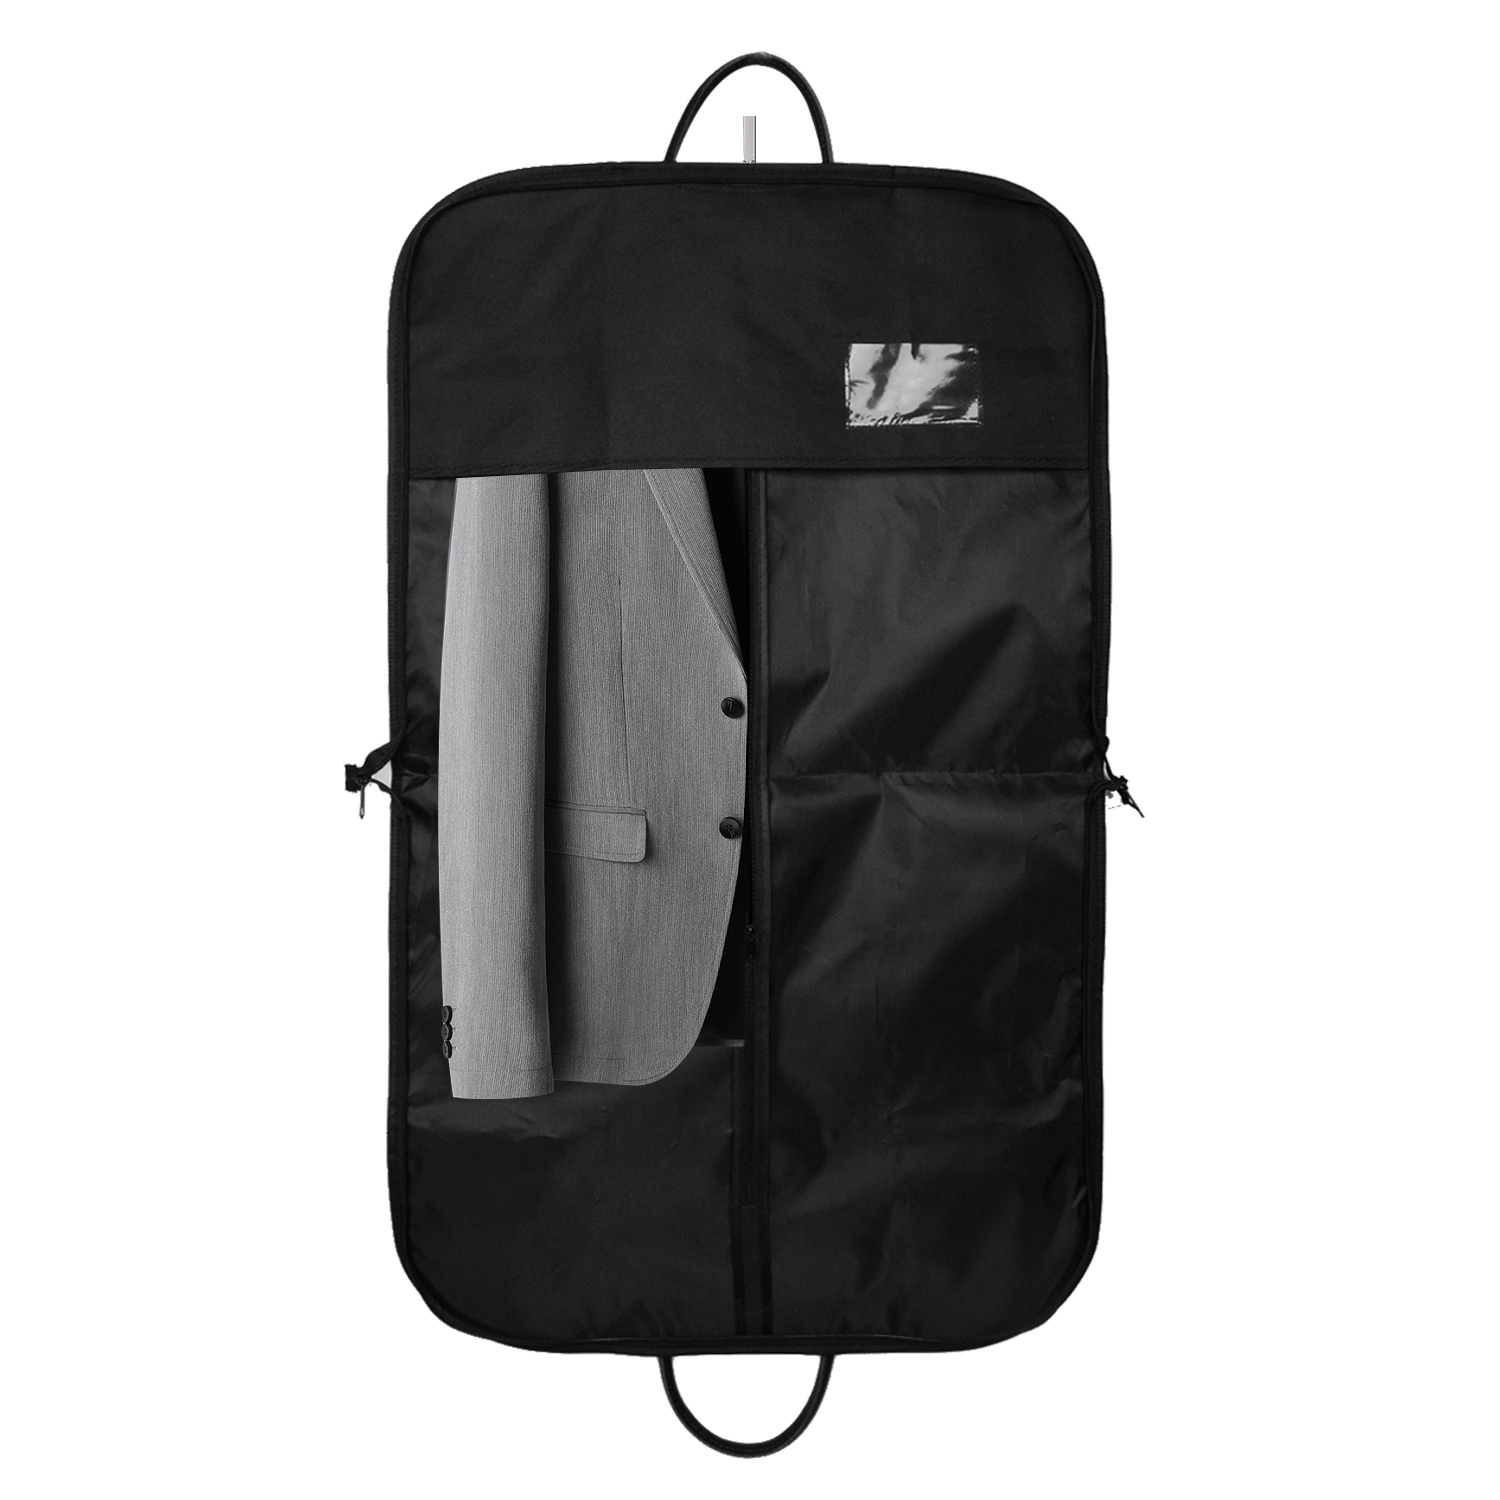 Soma Package Ltd Launches Eco-Friendly Garment Bag Collection, Redefining Sustainable Luxury